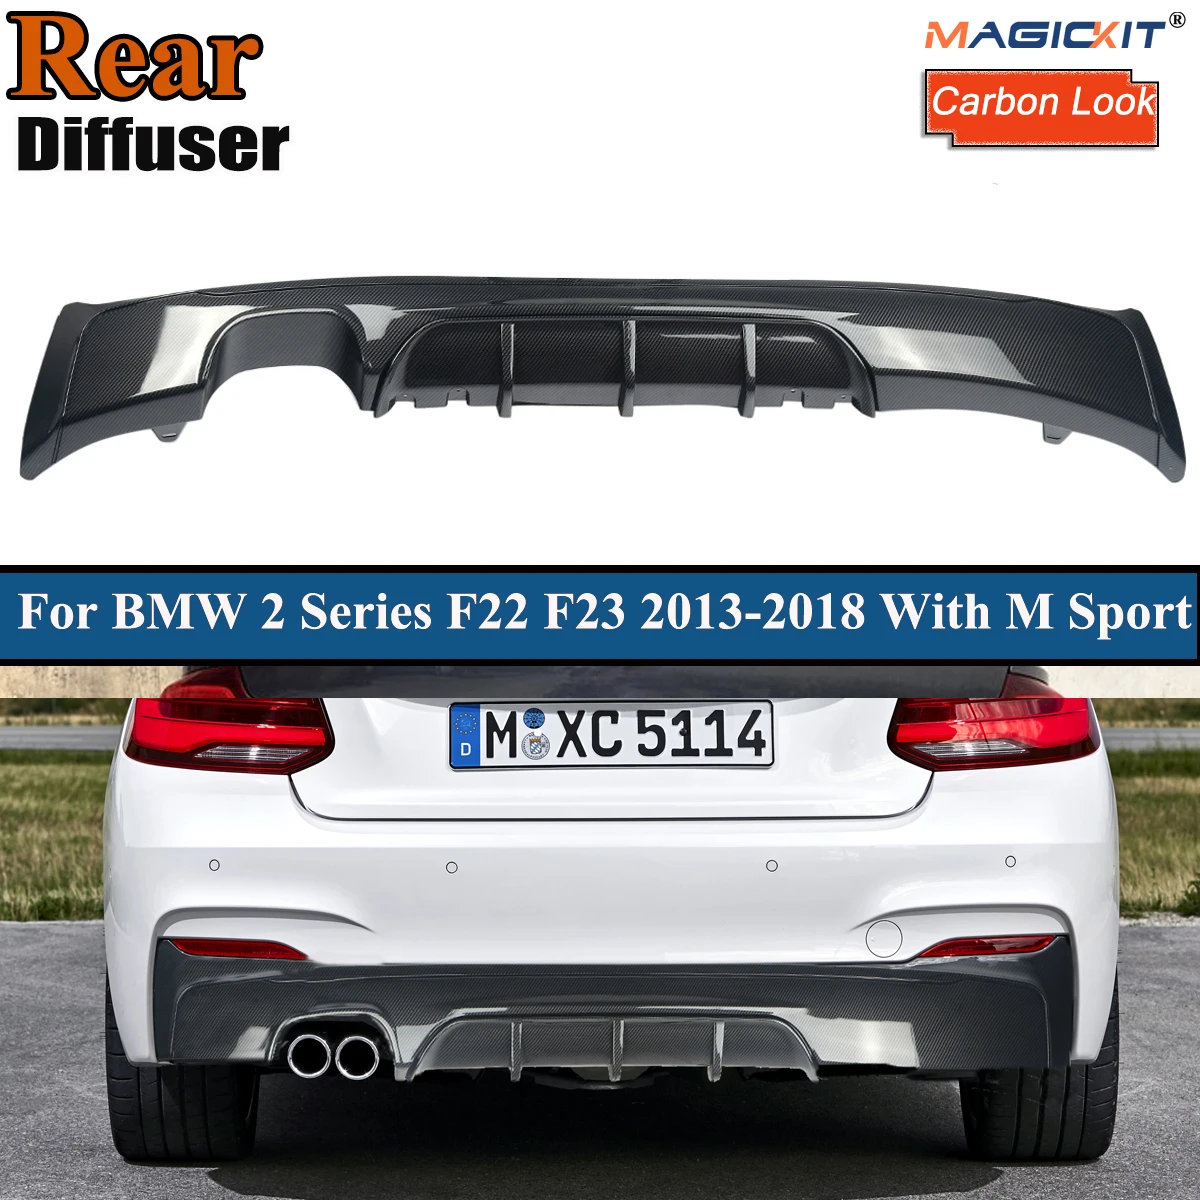 

Carbon Fiber Look M Performance Rear Diffuser For BMW 2 Series F22 F23 M235i M240i 2014- 2019 Dual Exhaust Outlet Guard Spoiler